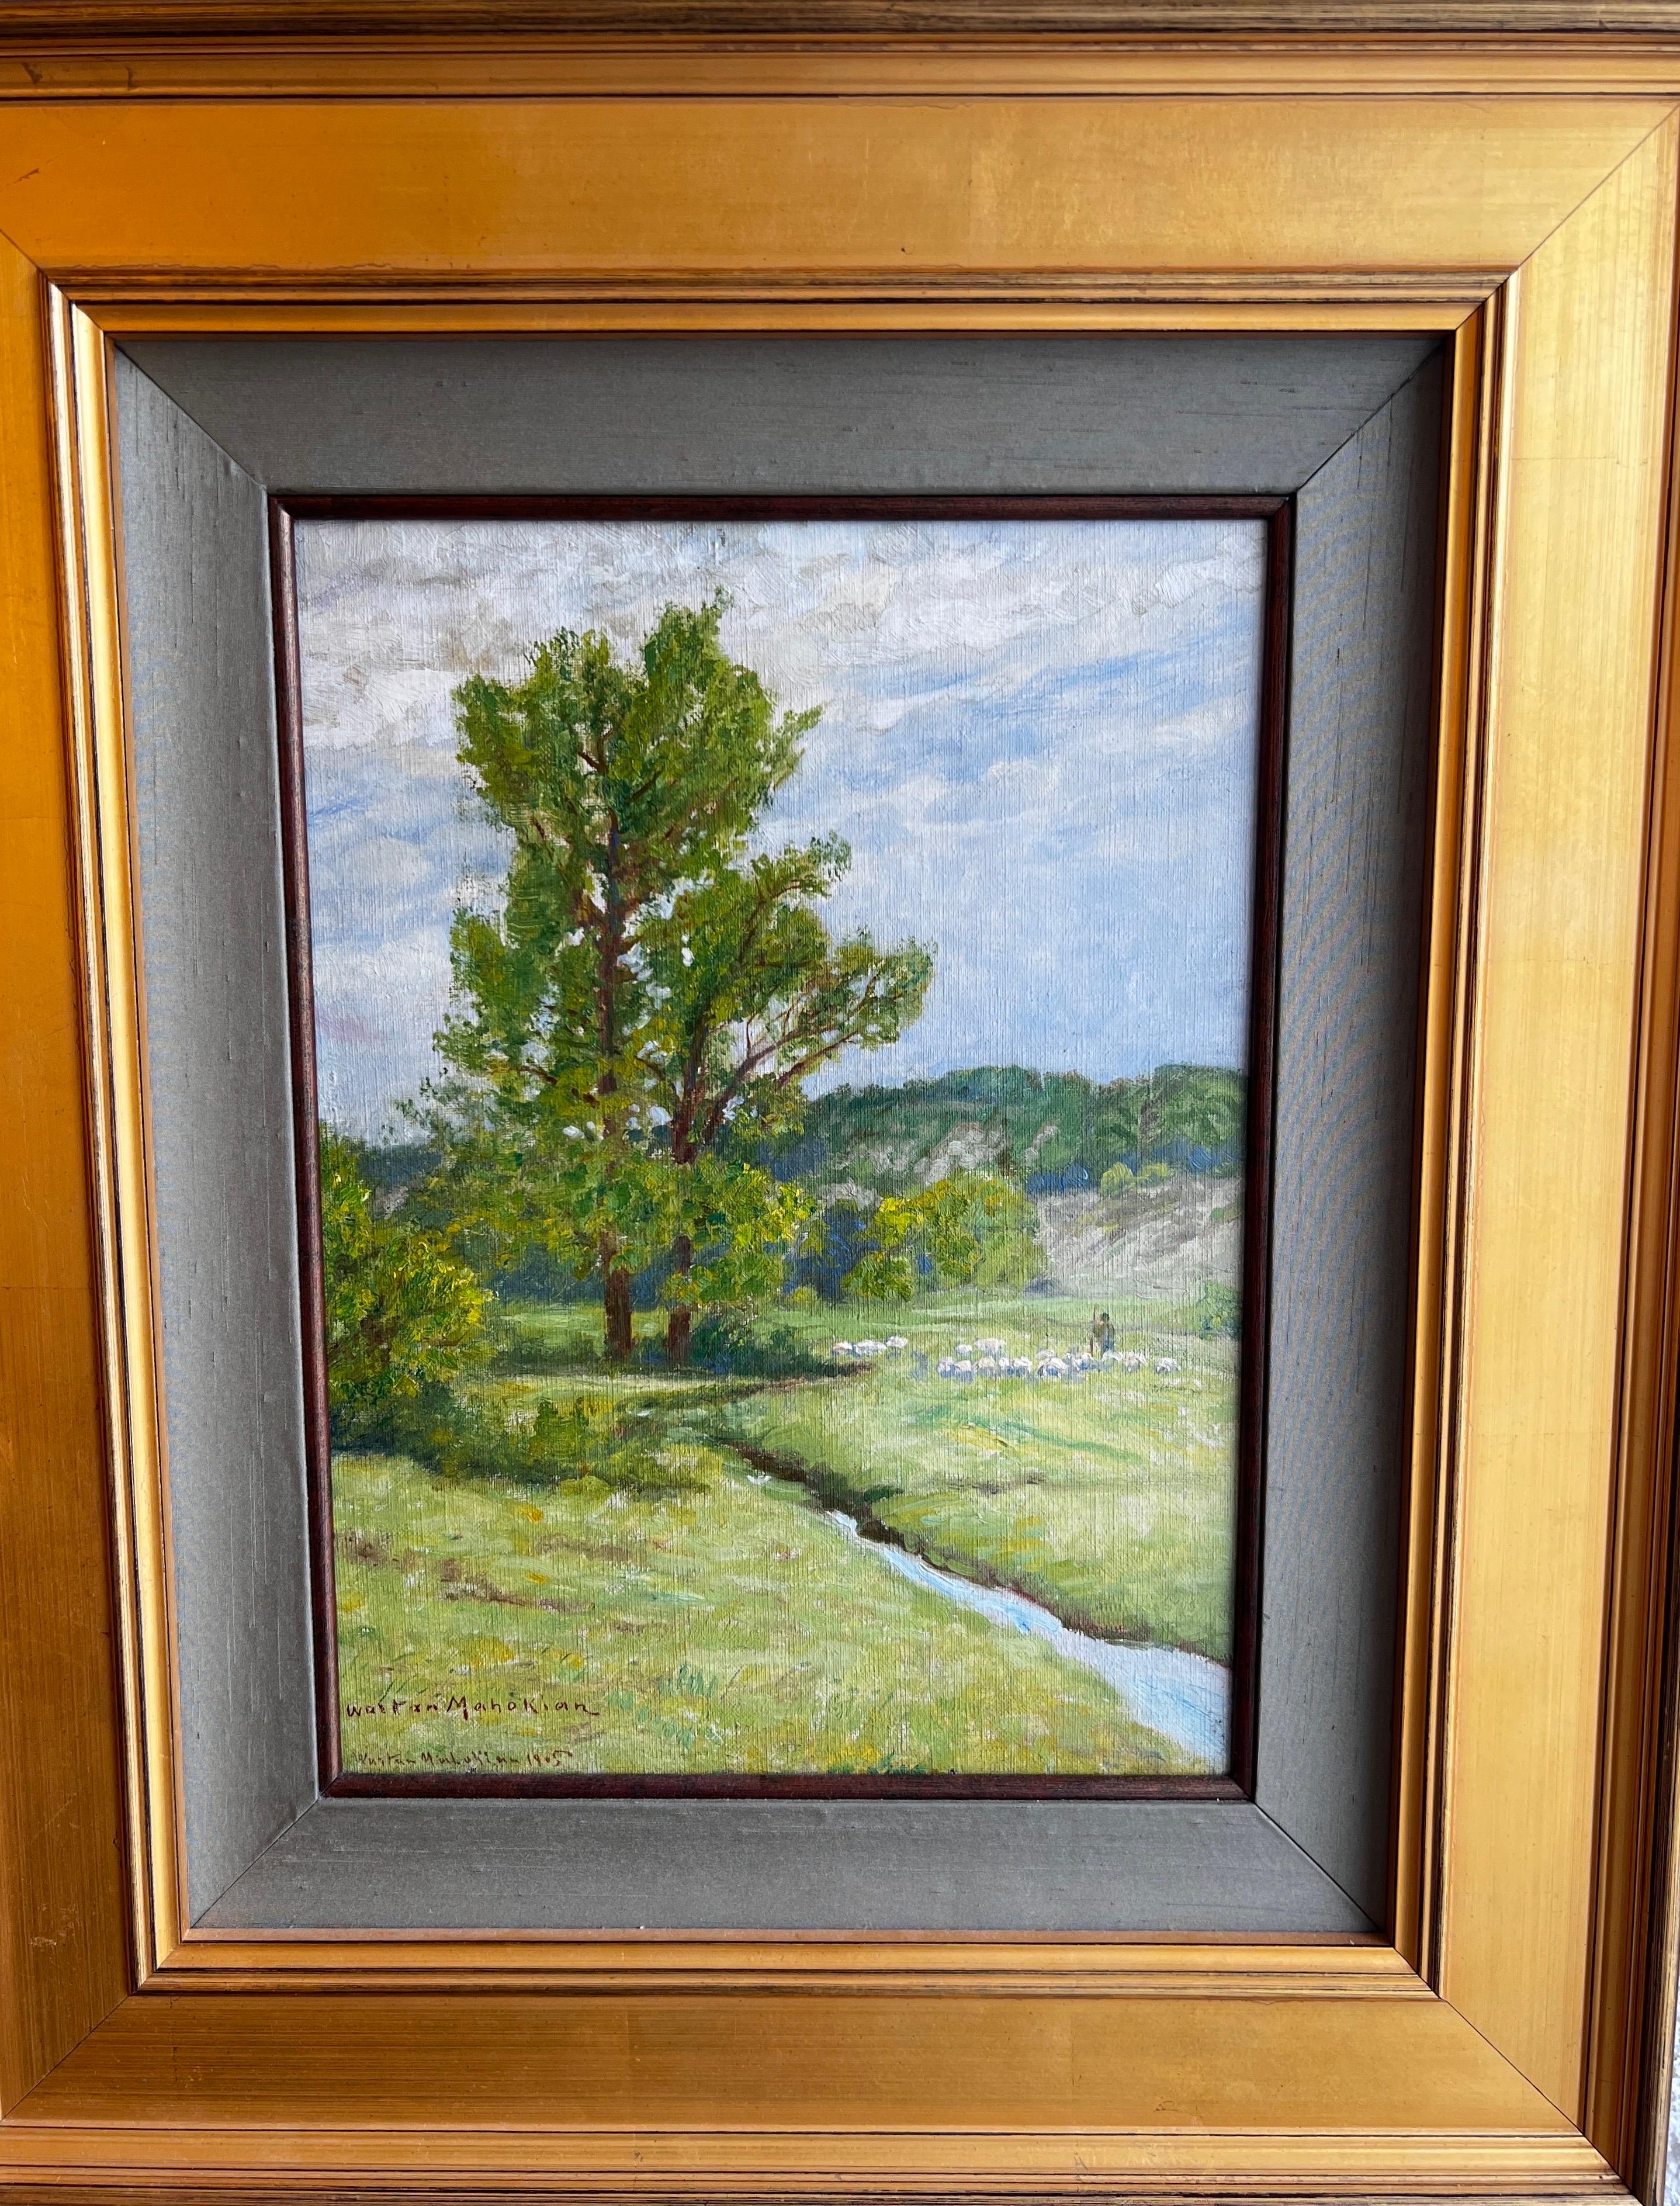 Transport yourself to the lush landscapes of Germany through this captivating artwork. Painted during the artist's stay in Germany, the painting beautifully captures the verdant scenery of the region. The artist's keen eye for detail is evident,